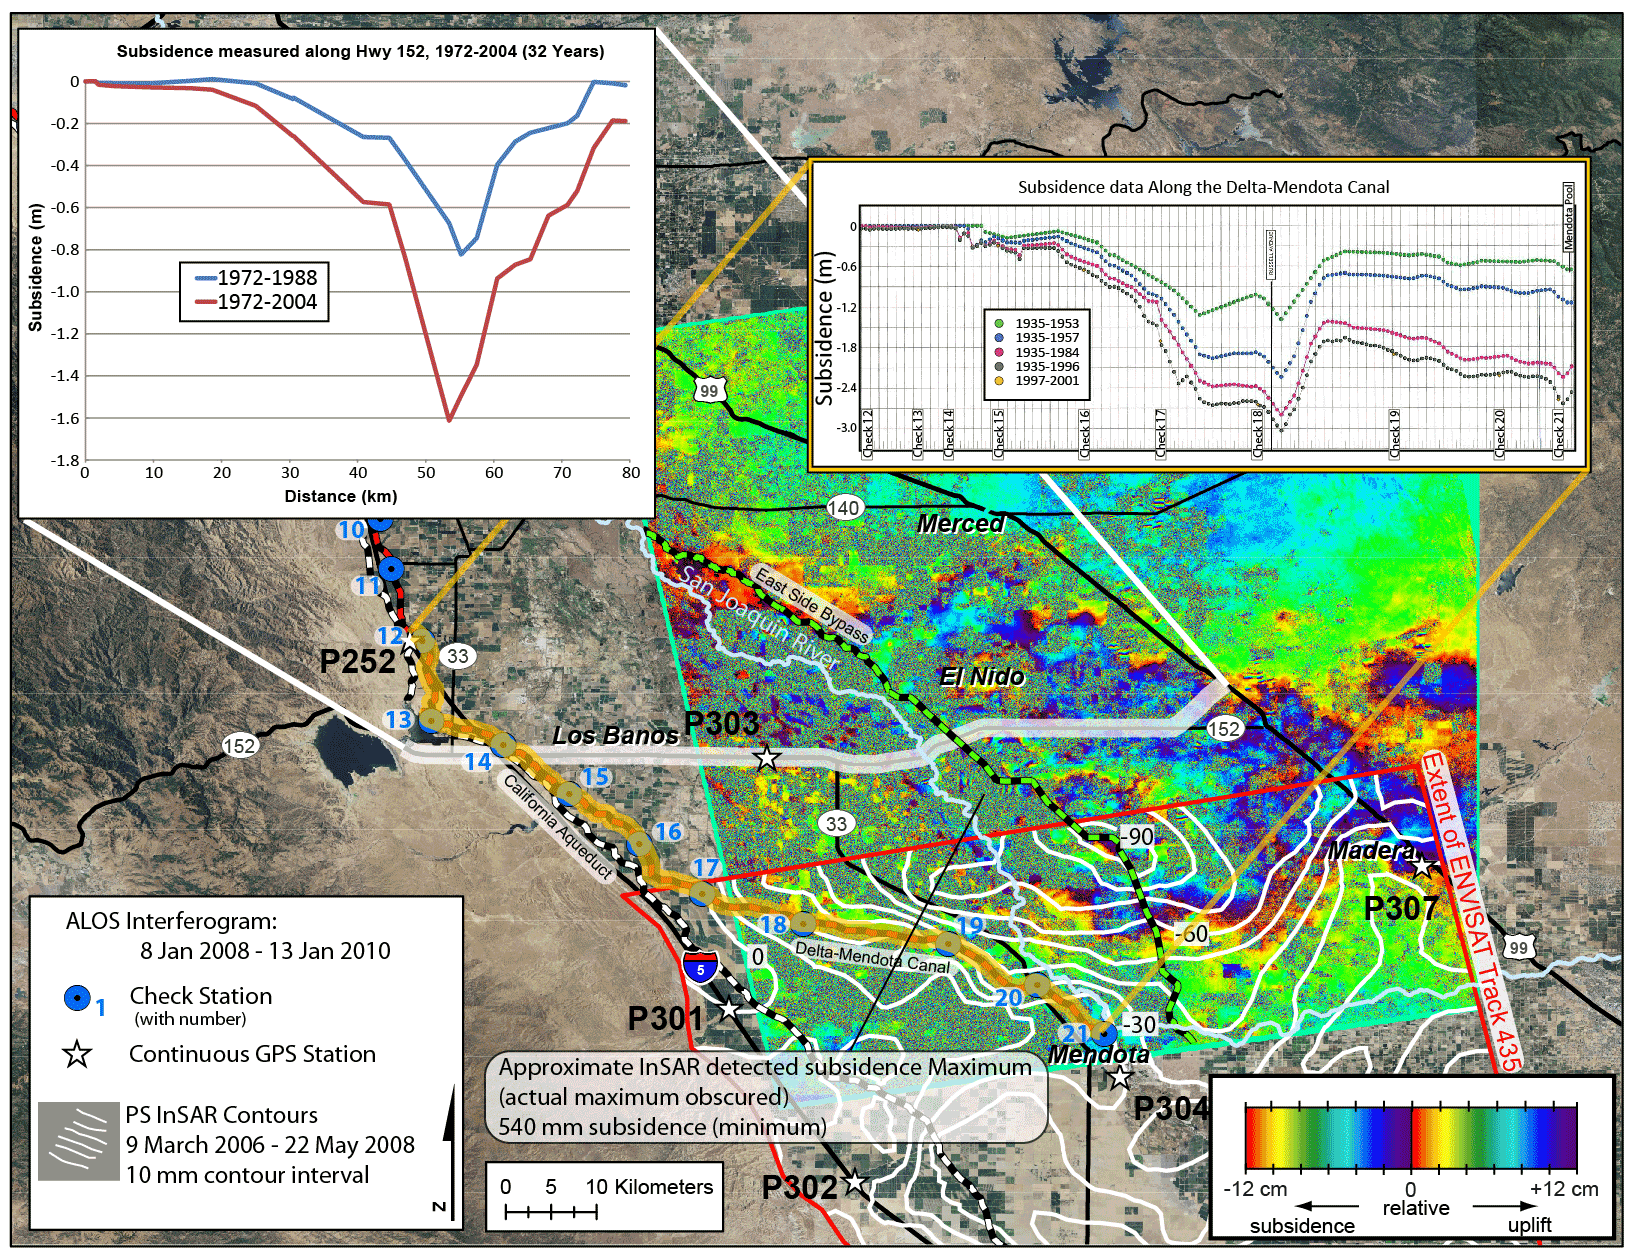 ALOS interferogram showing large subsidence feature affecting Checks 15-21, January 2008-January 2010, San Joaquin Valley, California. Graphs showing subsidence computed from repeat leveling surveys along Highway 152 for 1972-2004 and along the Delta-Mendota Canal for 1935-1996, subsidence computed from GPS surveys at selected check stations for 1997-2001, and contours showing subsidence measured using PS InSAR during March 9, 2006-May 22, 2008, San Joaquin Valley, California. The above is preliminary data and is subject to revision.